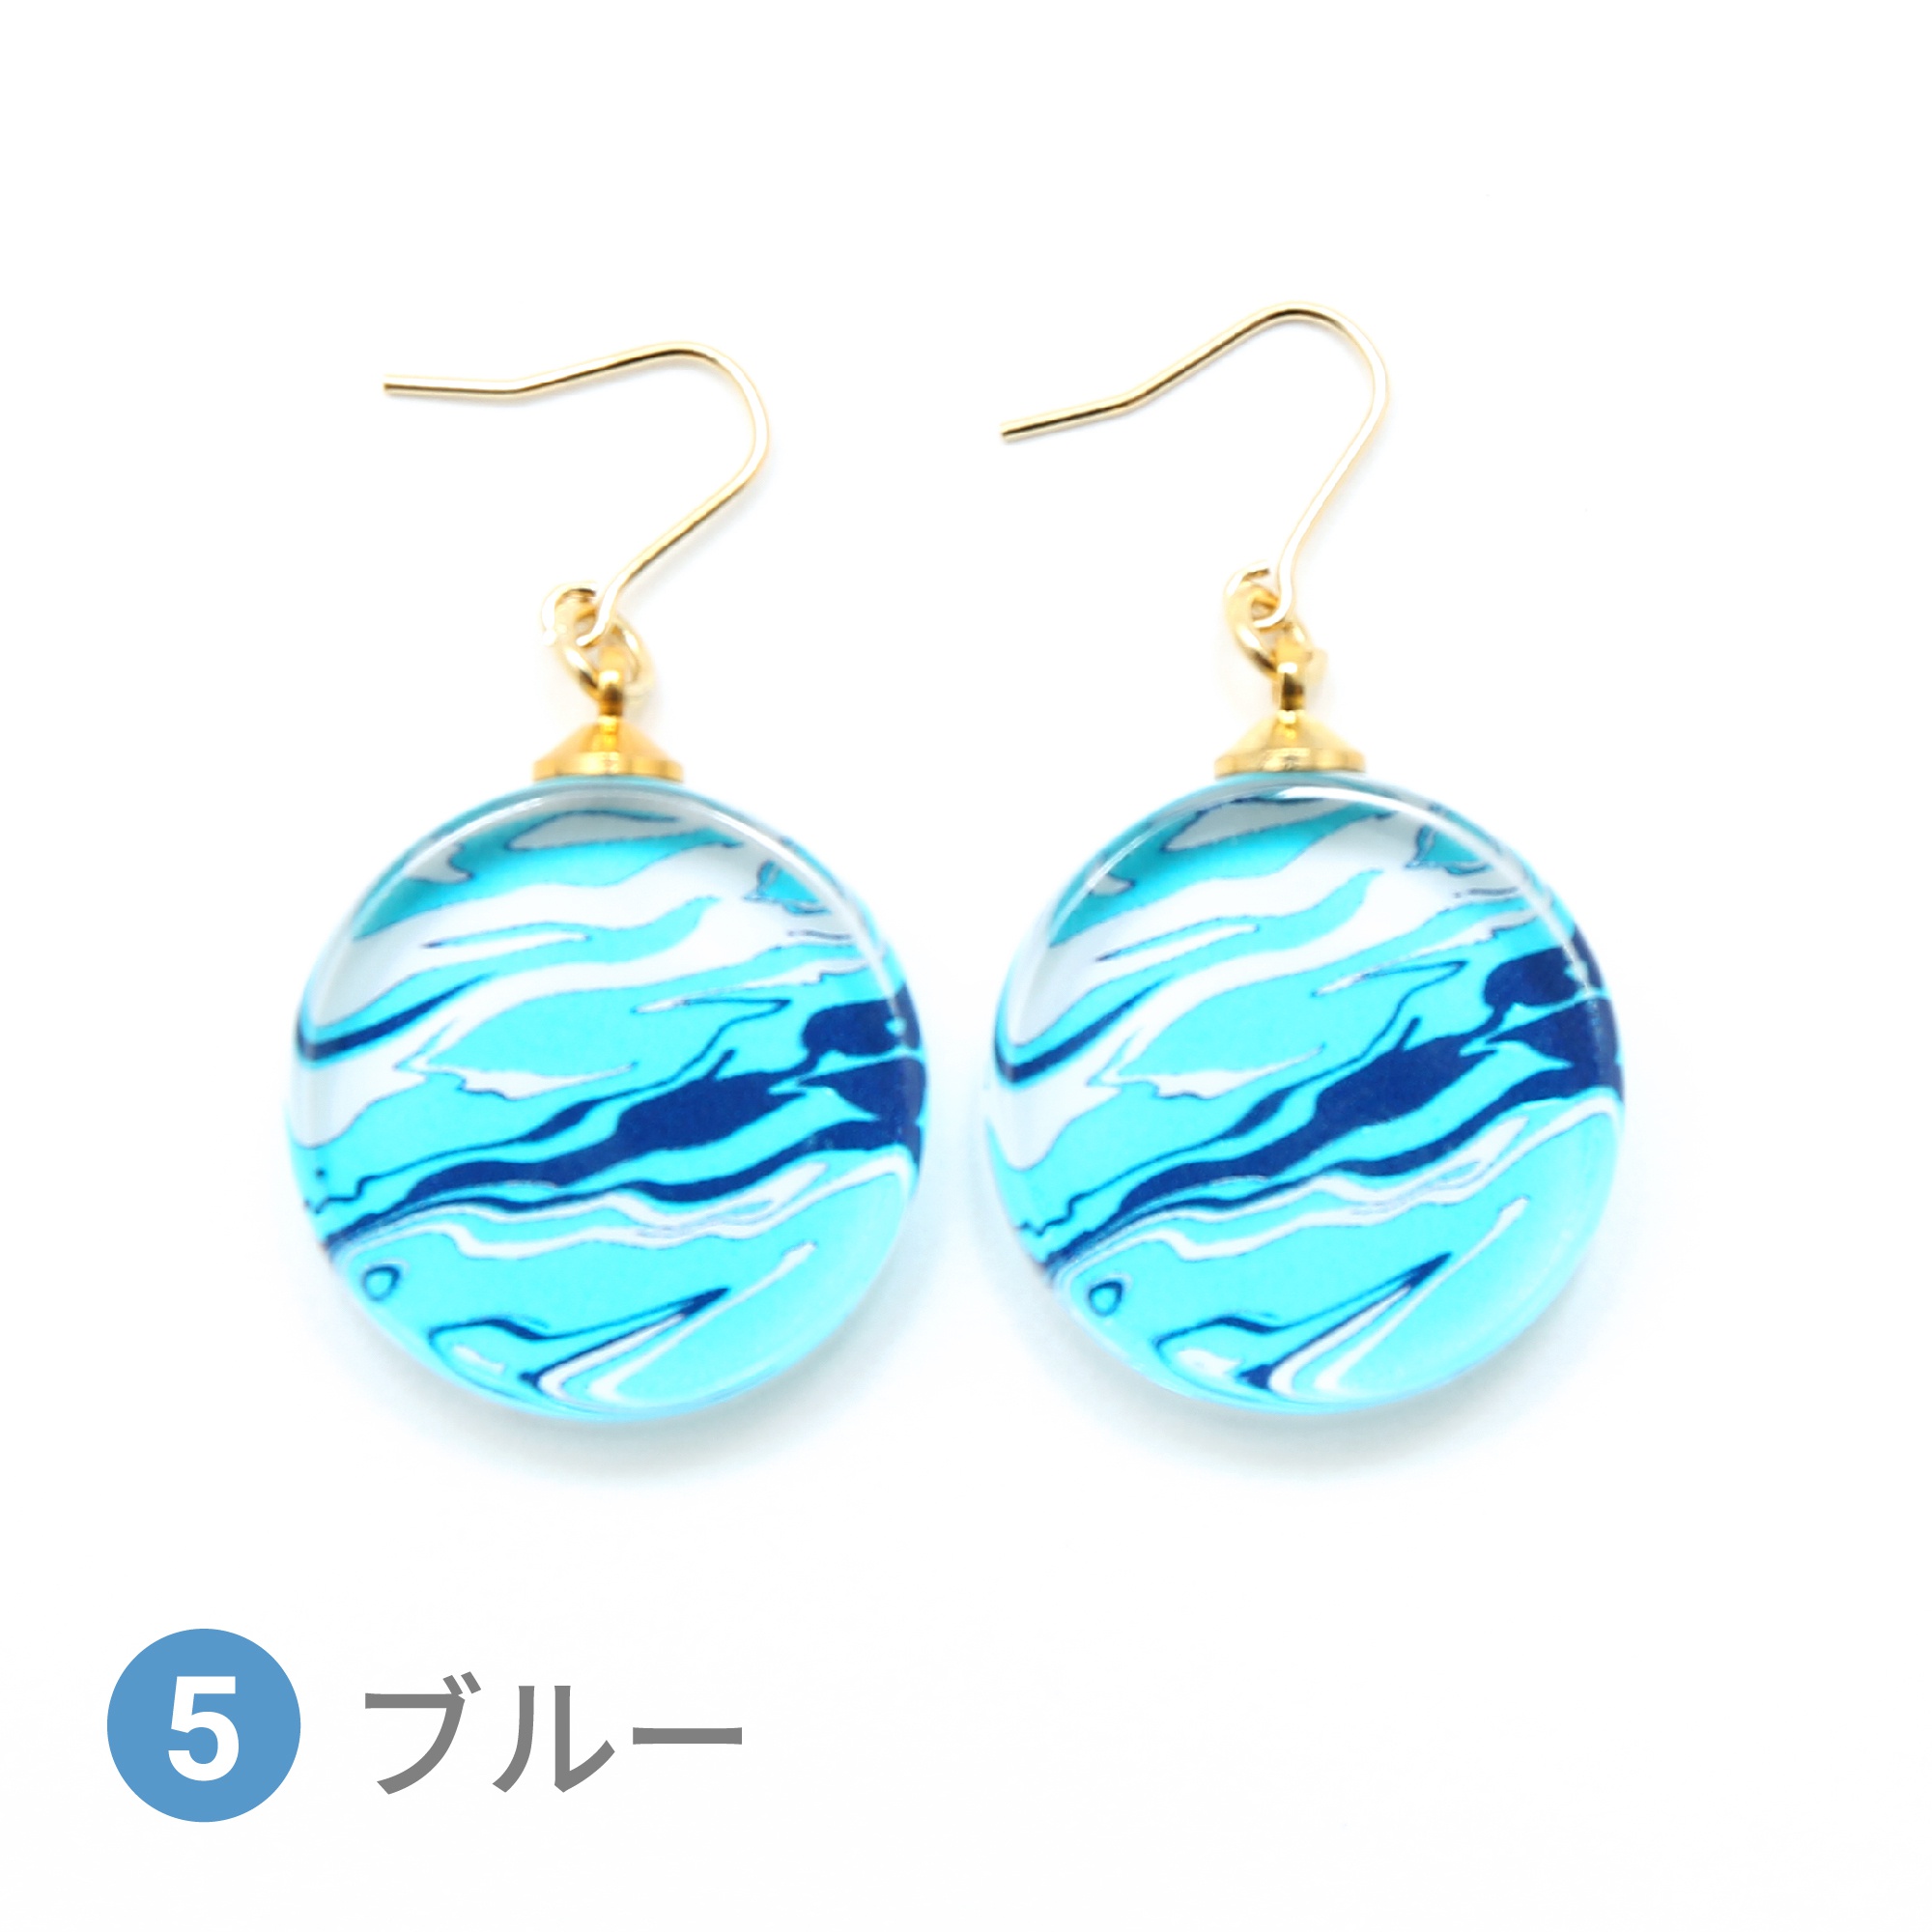 Glass accessories Pierced Earring MARBLE blue round shape